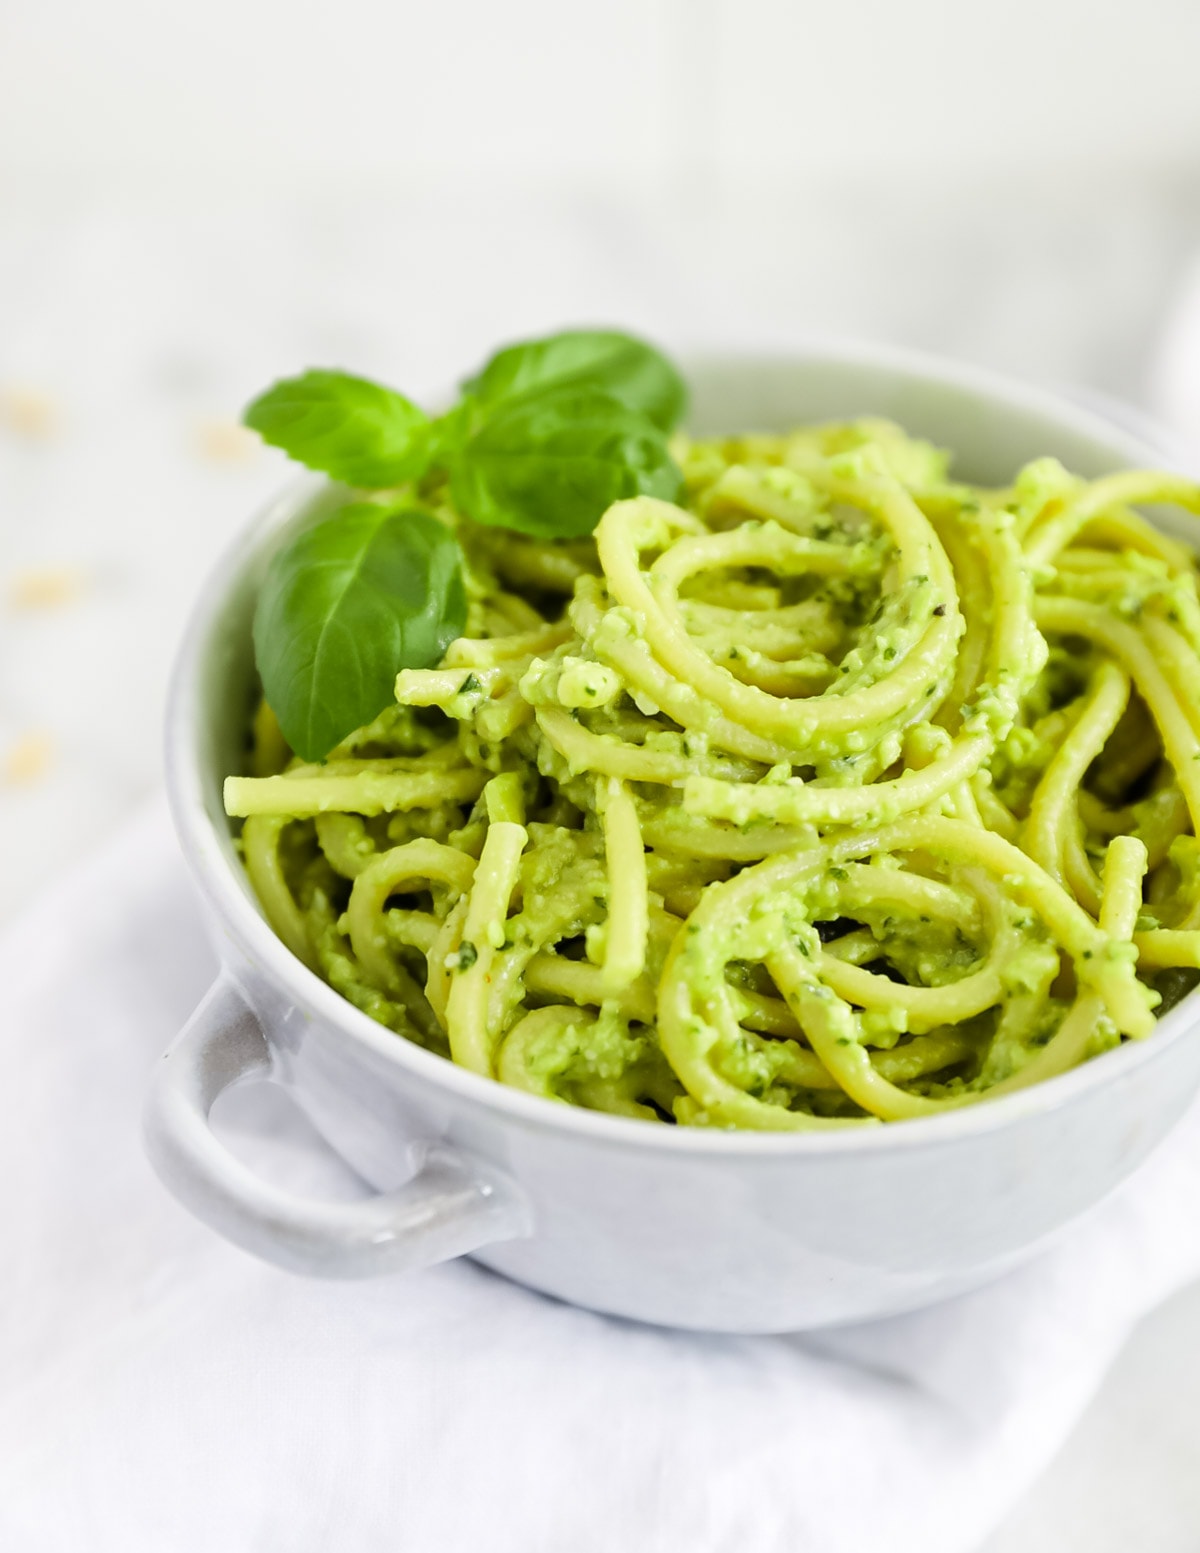 Creamy green pesto over spaghetti noodles, served in a blue bowl and garnished with fresh basil leaves